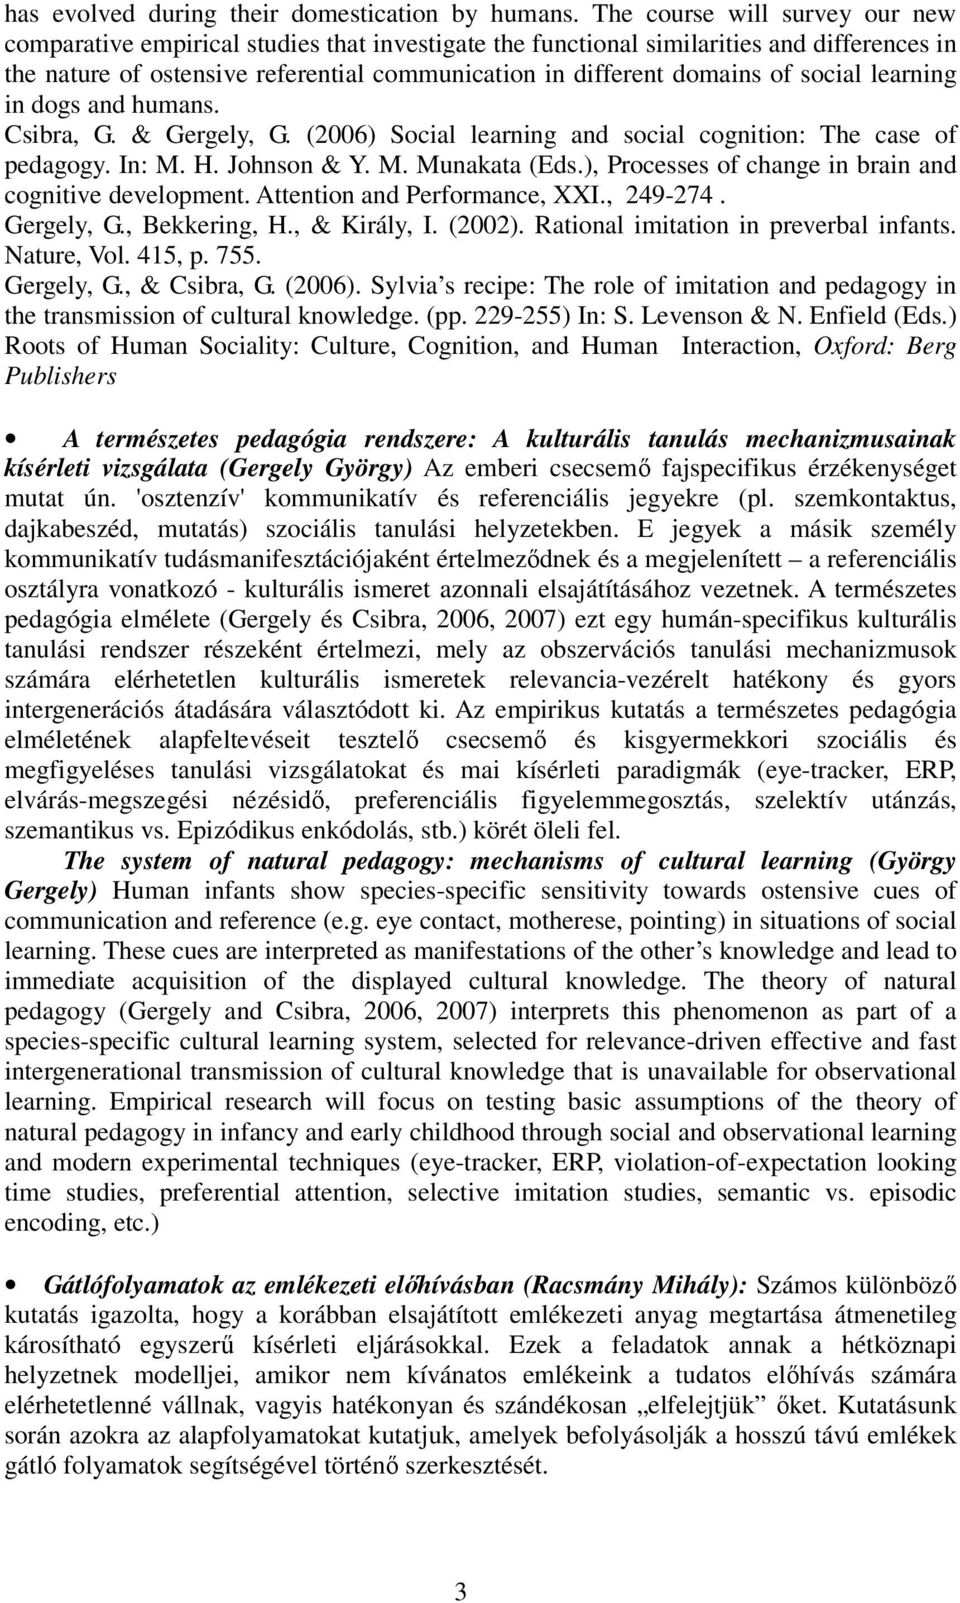 social learning in dogs and humans. Csibra, G. & Gergely, G. (2006) Social learning and social cognition: The case of pedagogy. In: M. H. Johnson & Y. M. Munakata (Eds.